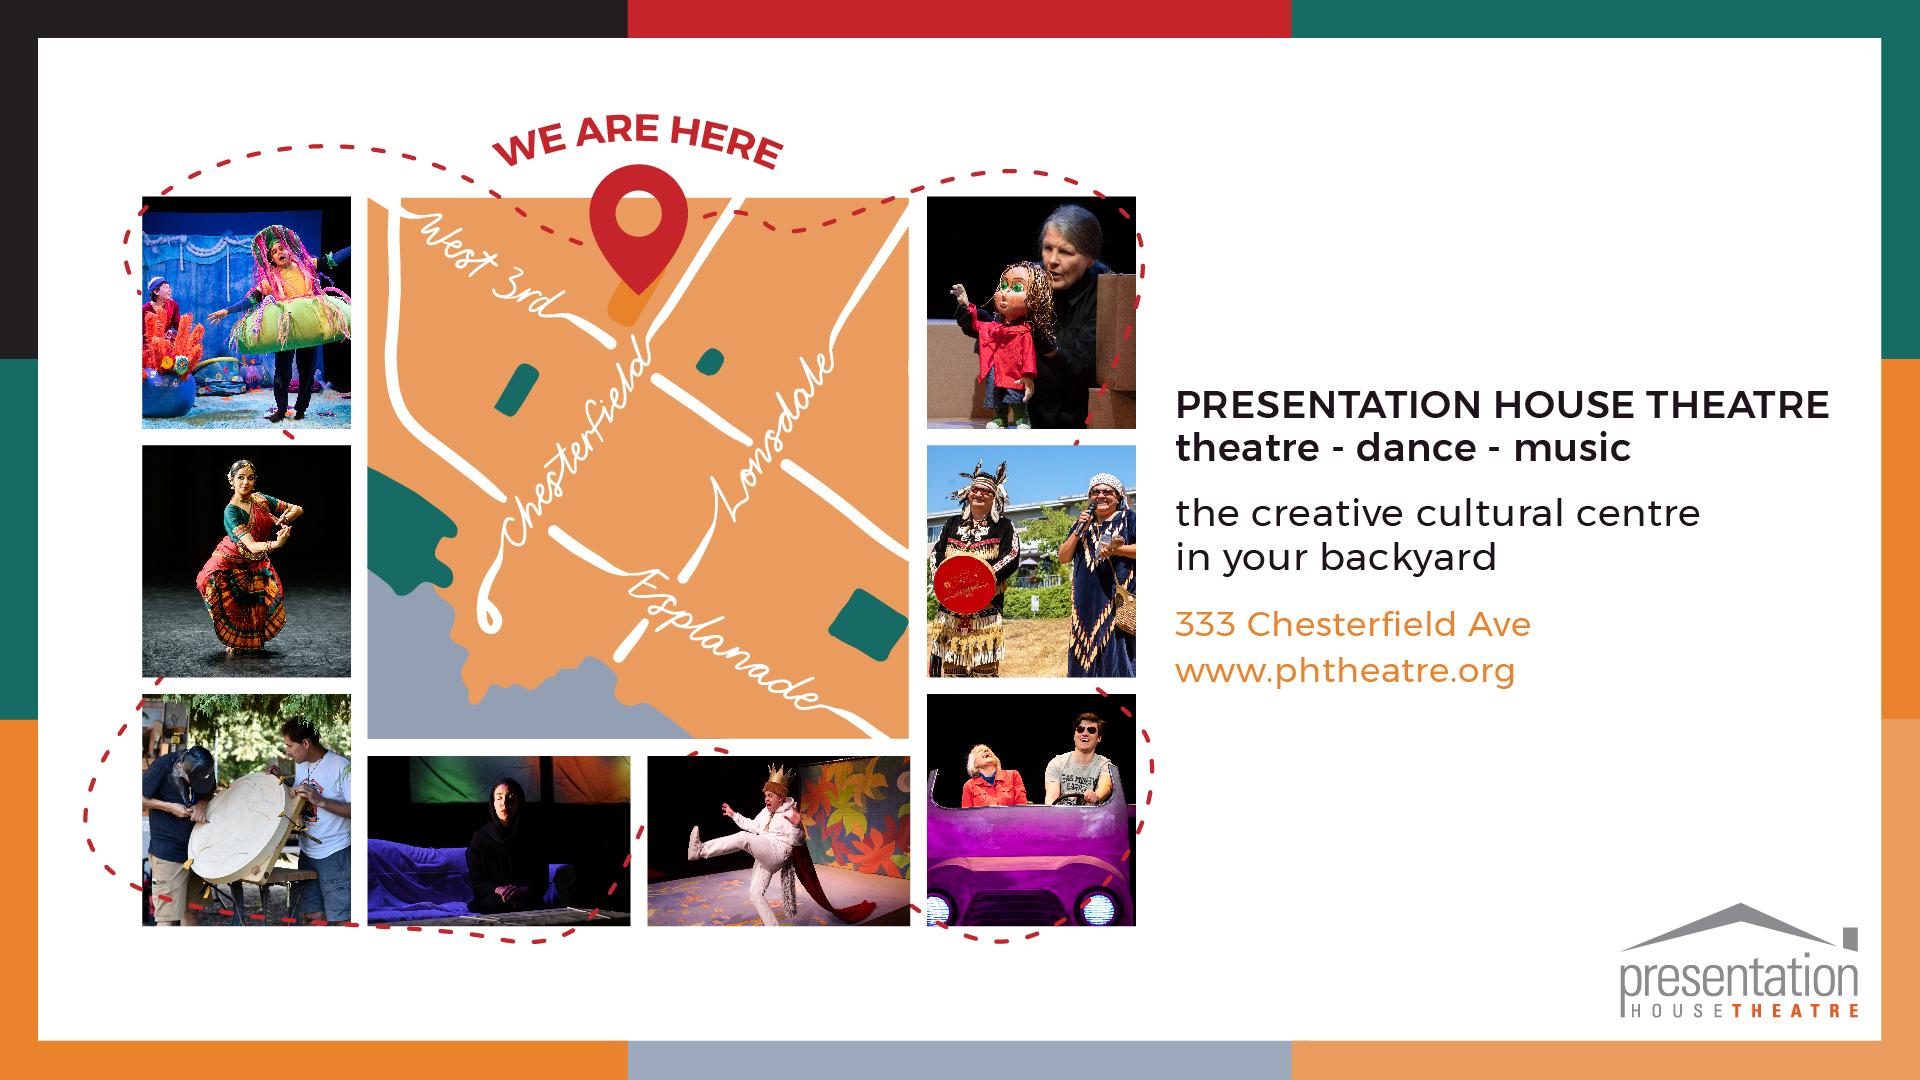 A banner image with the text: "Presentation House Theatre: theatre, dance, music" and below that, "the creative cultural centre in your backyard". Below that text is the street address, "333 Chesterfield Ave", and the web address, "www.phtheatre.org". The banner image includes the PHT logos and various photos of theatrical productions, community events, artwork, music, and dance.